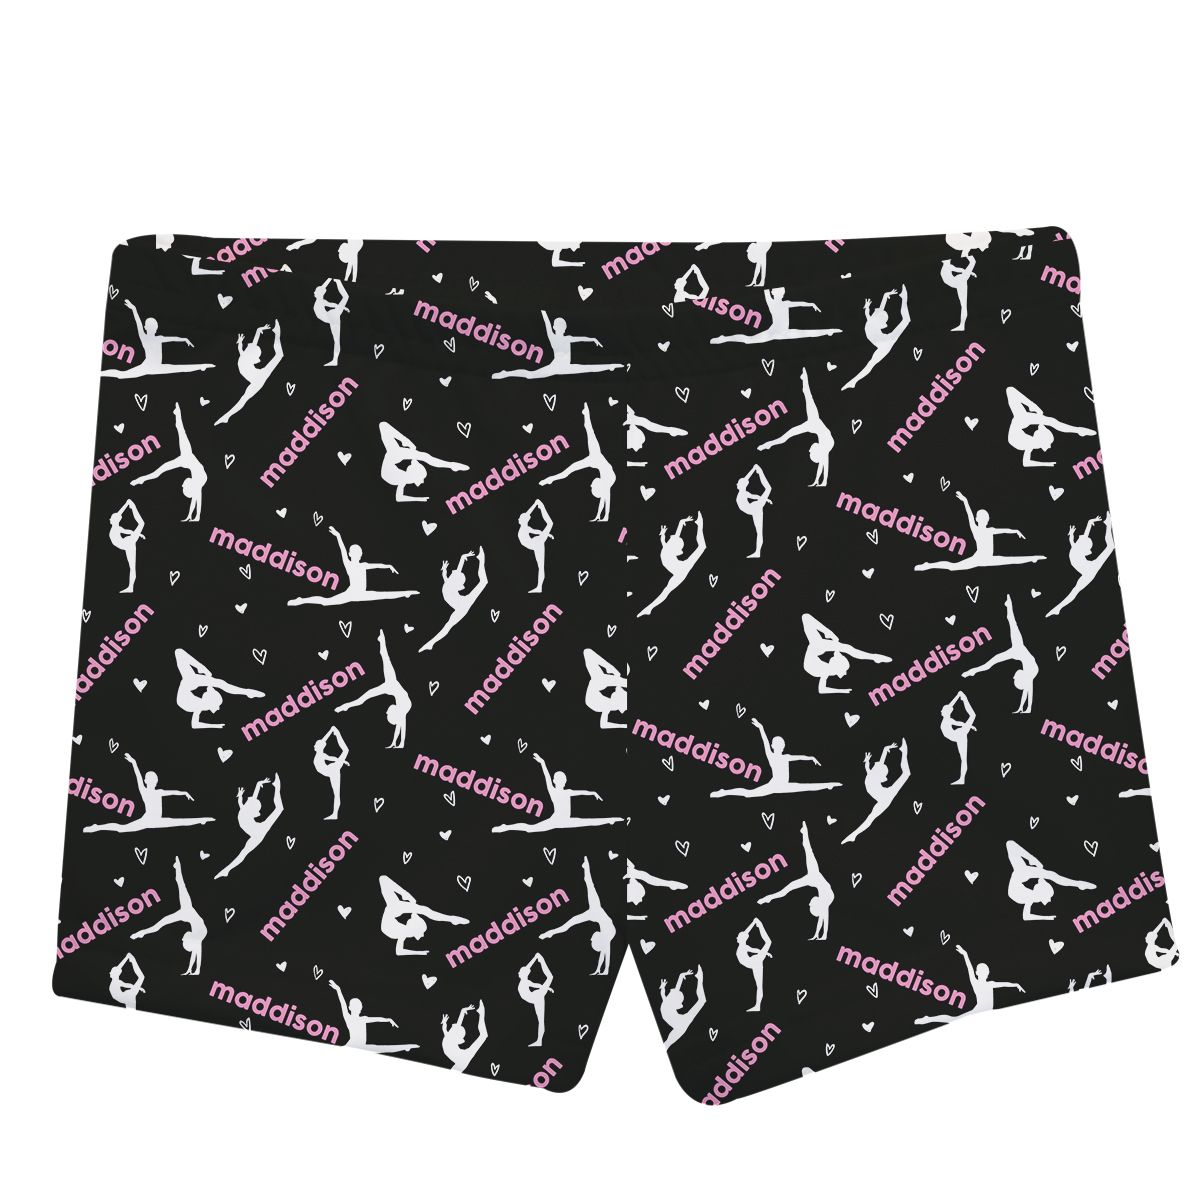 Gymnast Silhouette and Name Print Black Shorties - Wimziy&Co.